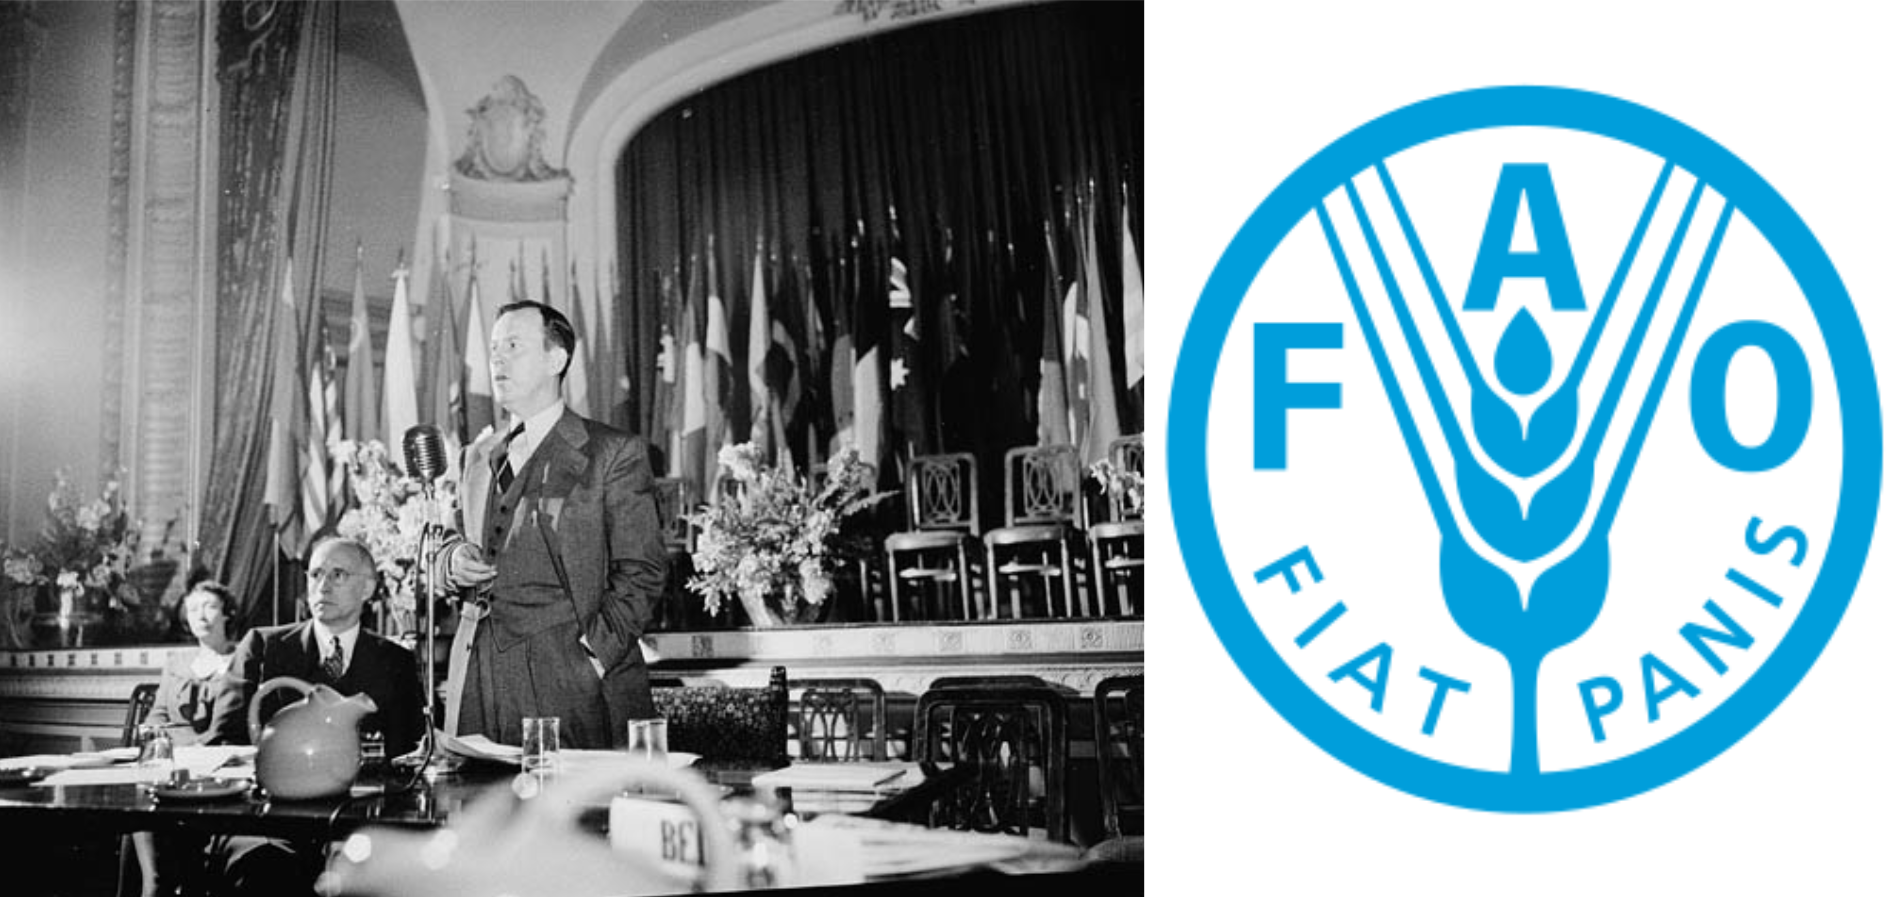 Future Canadian Prime Minister Lester Bowles Pearson presiding at the founding conference of the United Nations Food and Agriculture Organization, 1945 (right). Logo of the Food and Agriculture Organization (left).